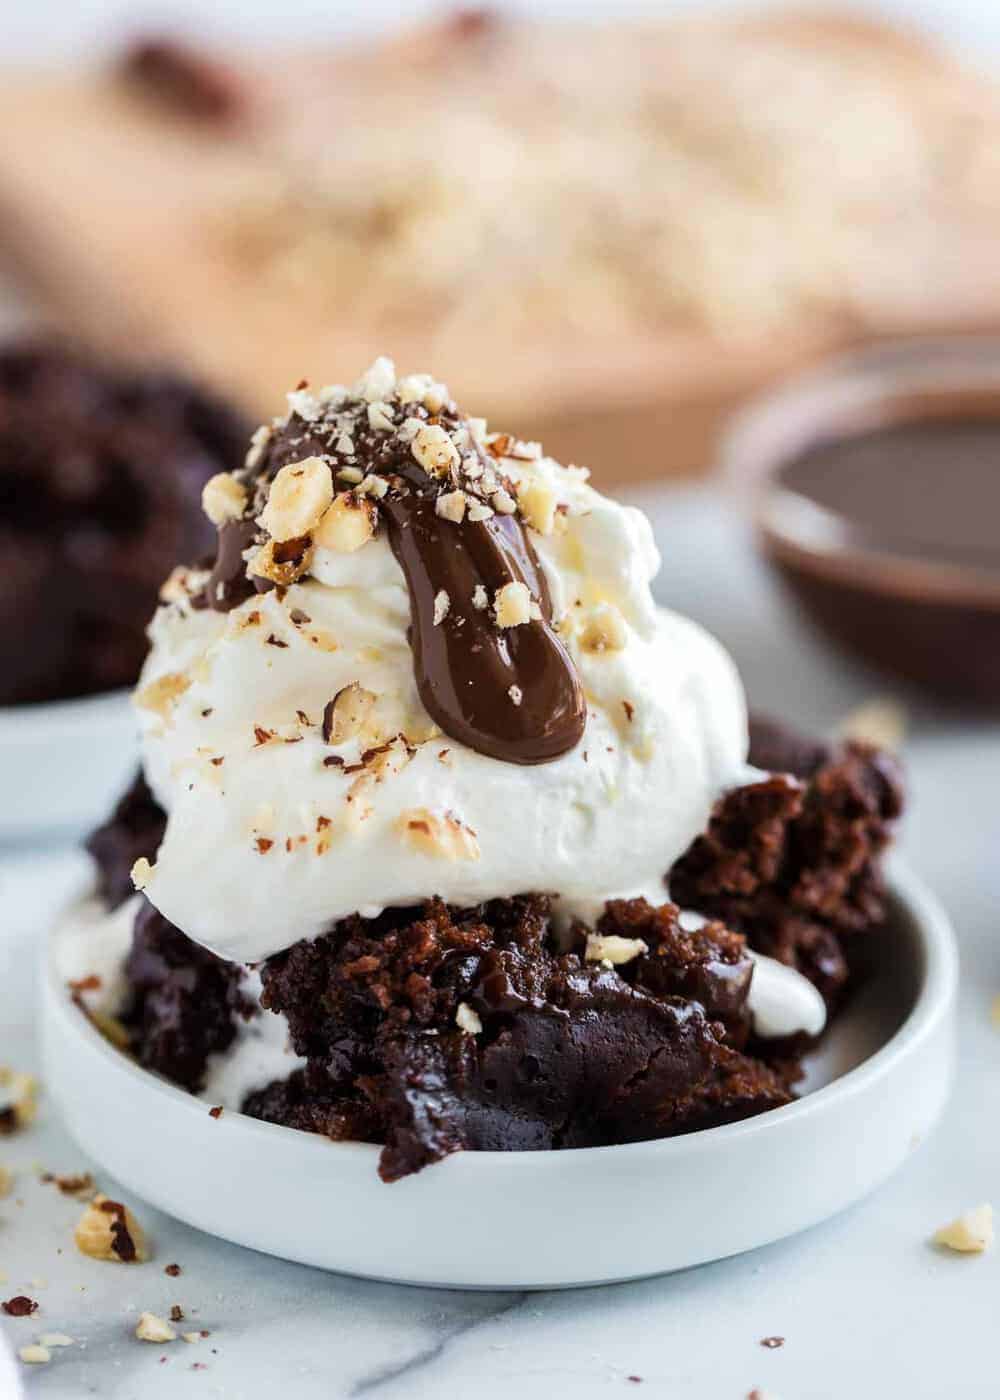 Bowl of crockpot chocolate cake topped with ice cream, nuts and hot fudge.